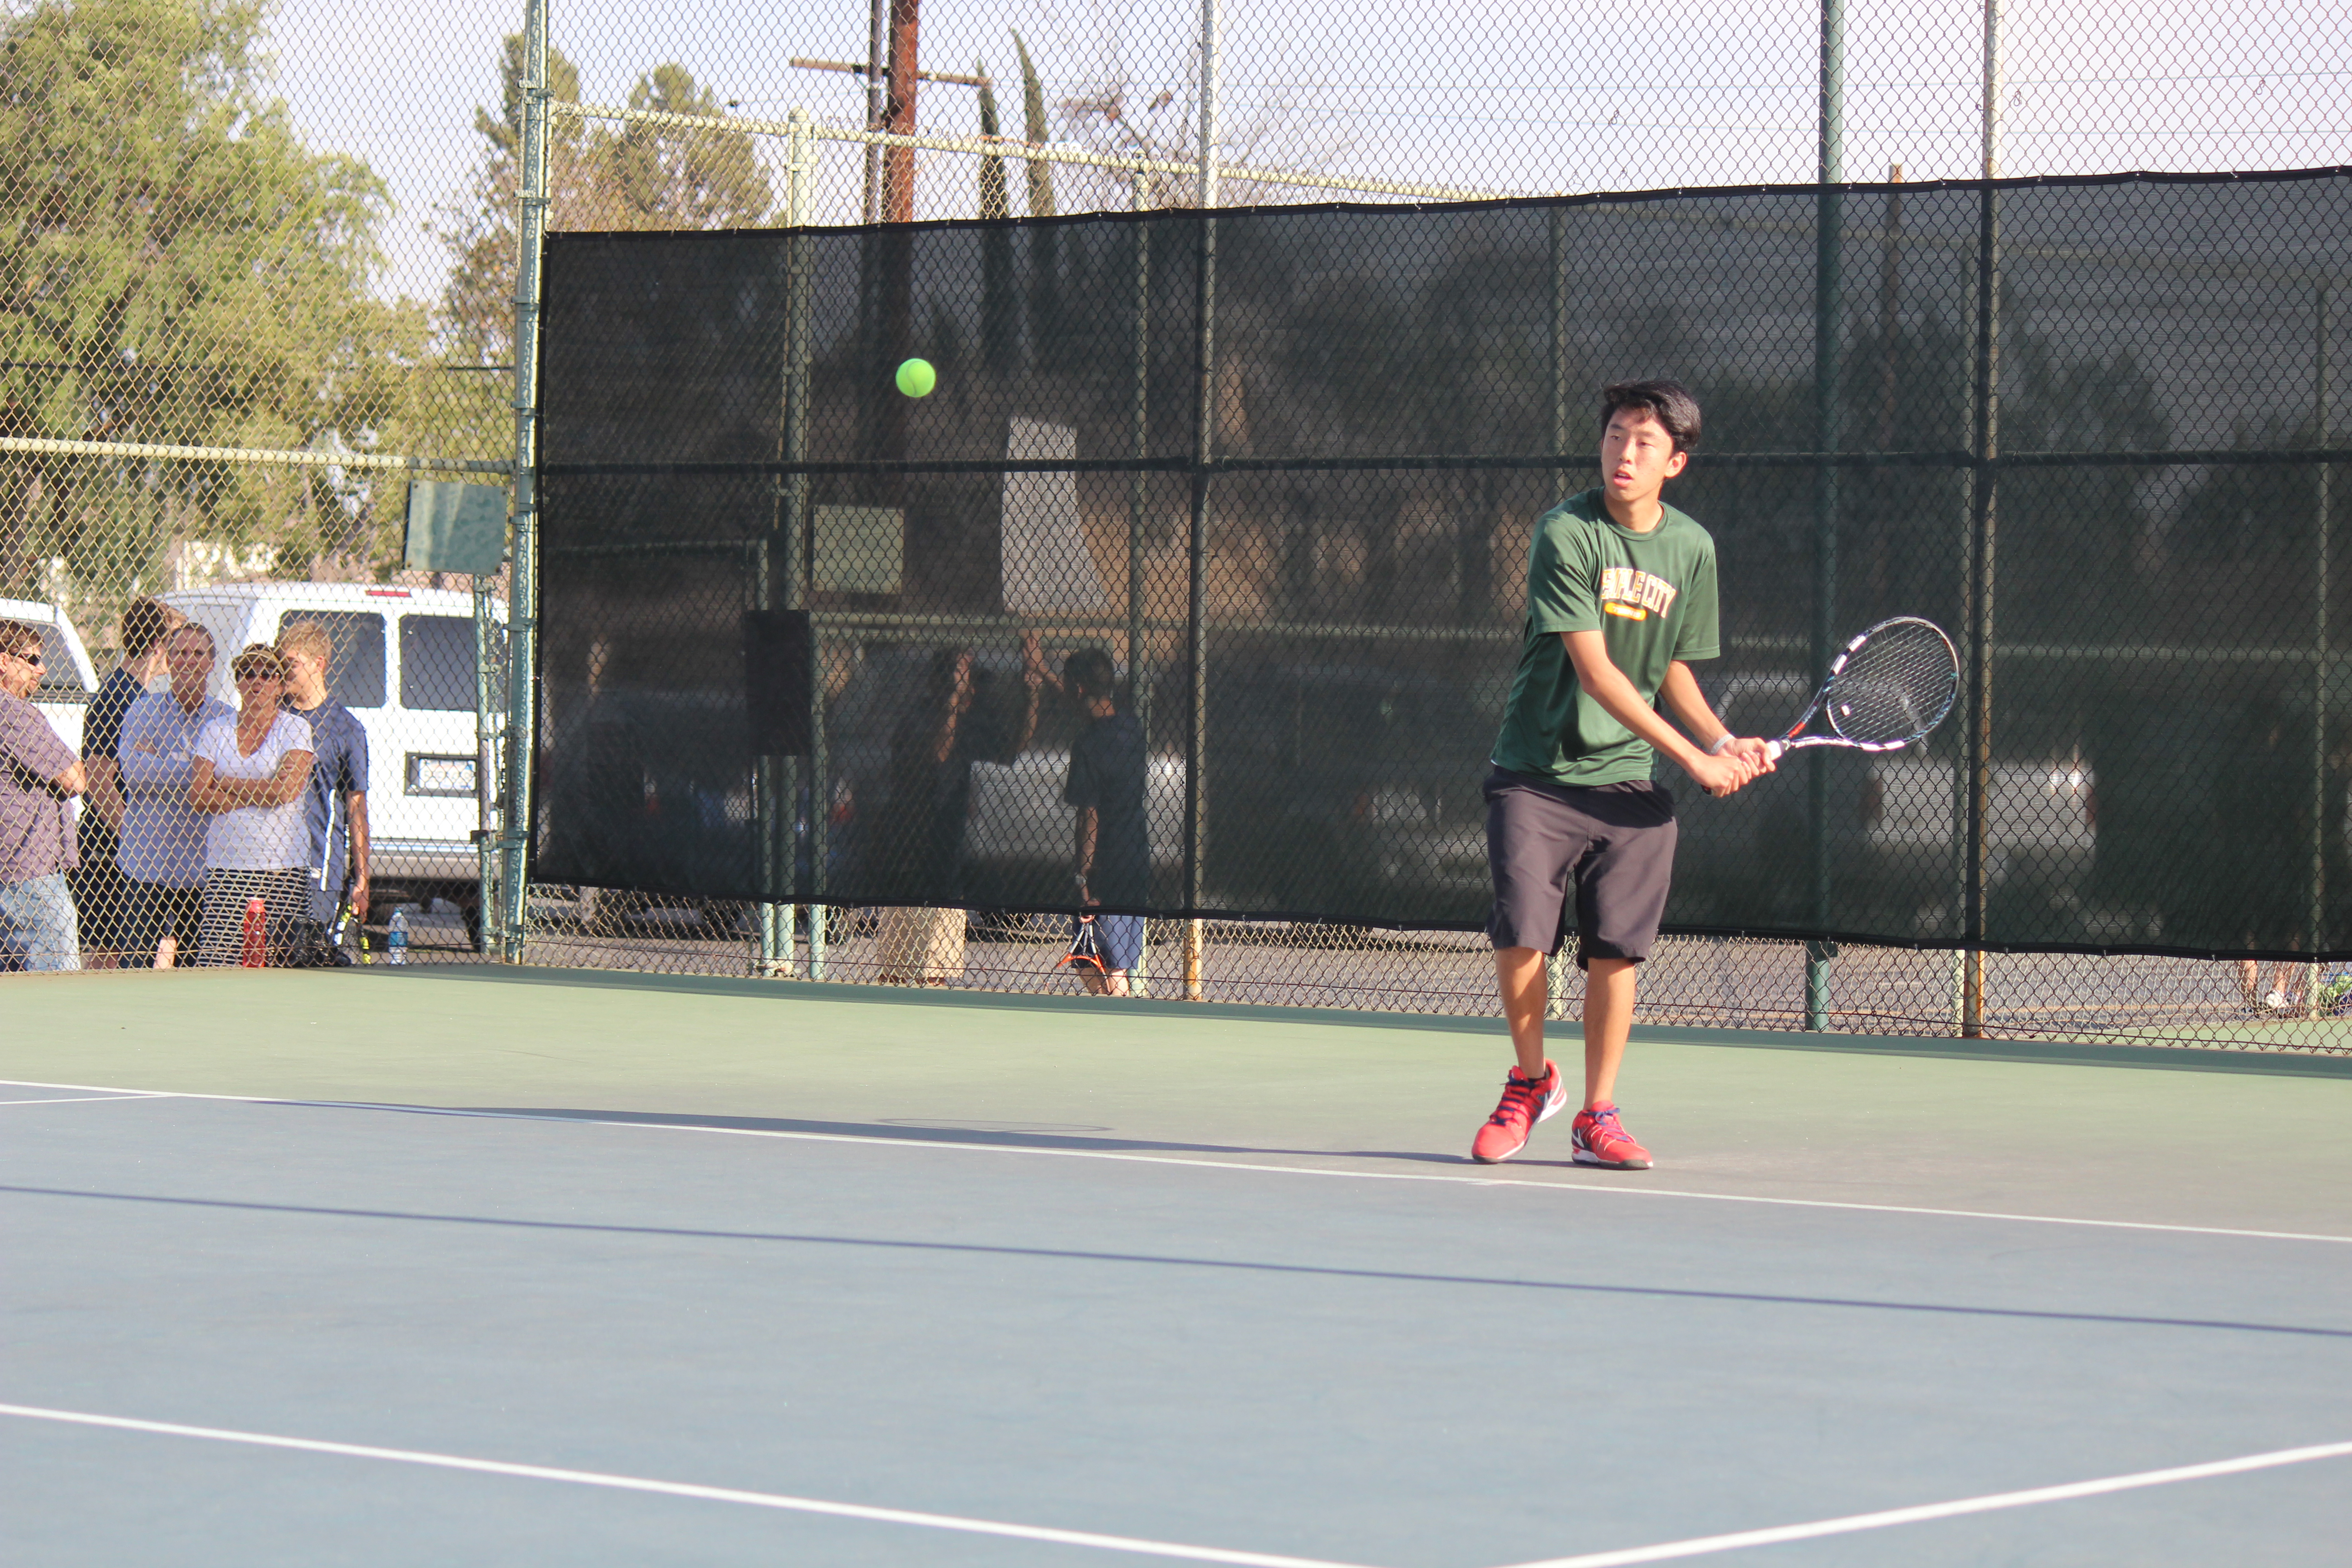 Boys Tennis swings and strikes for success